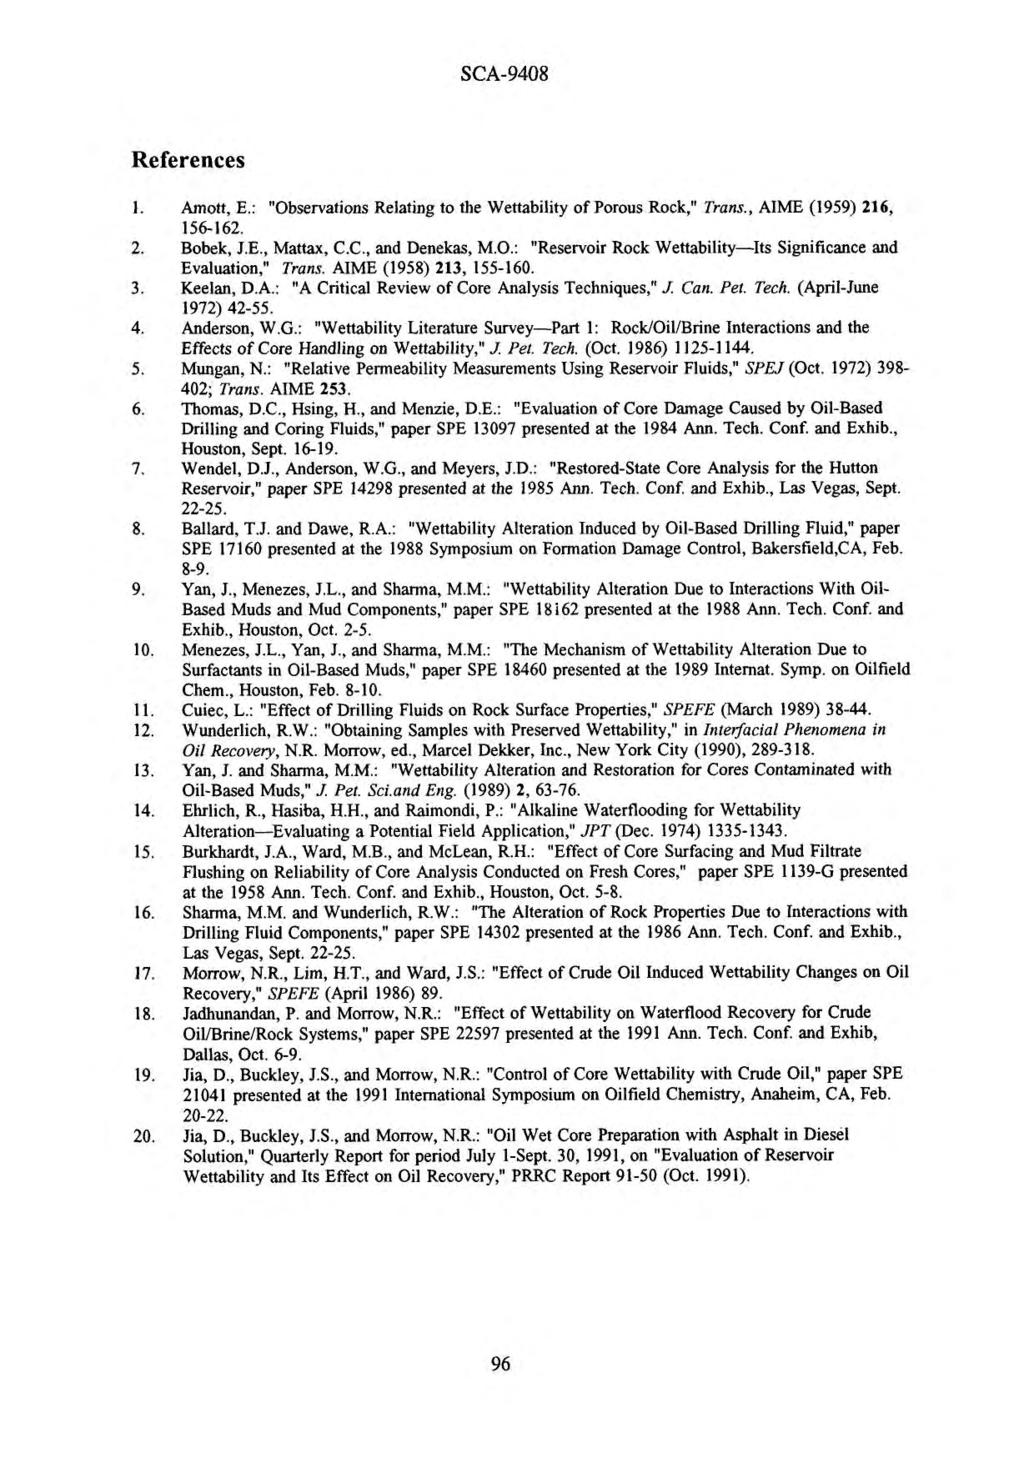 References Amott, E.: "Observations Relating to the Wettability of Porous Rock," Trans., AIME (1959) 216, 156-162. Bobek, J.E., Mattax, C.C., and Denekas, M.O.: "Reservoir Rock Wettability-Its Significance and Evaluation," Trans.